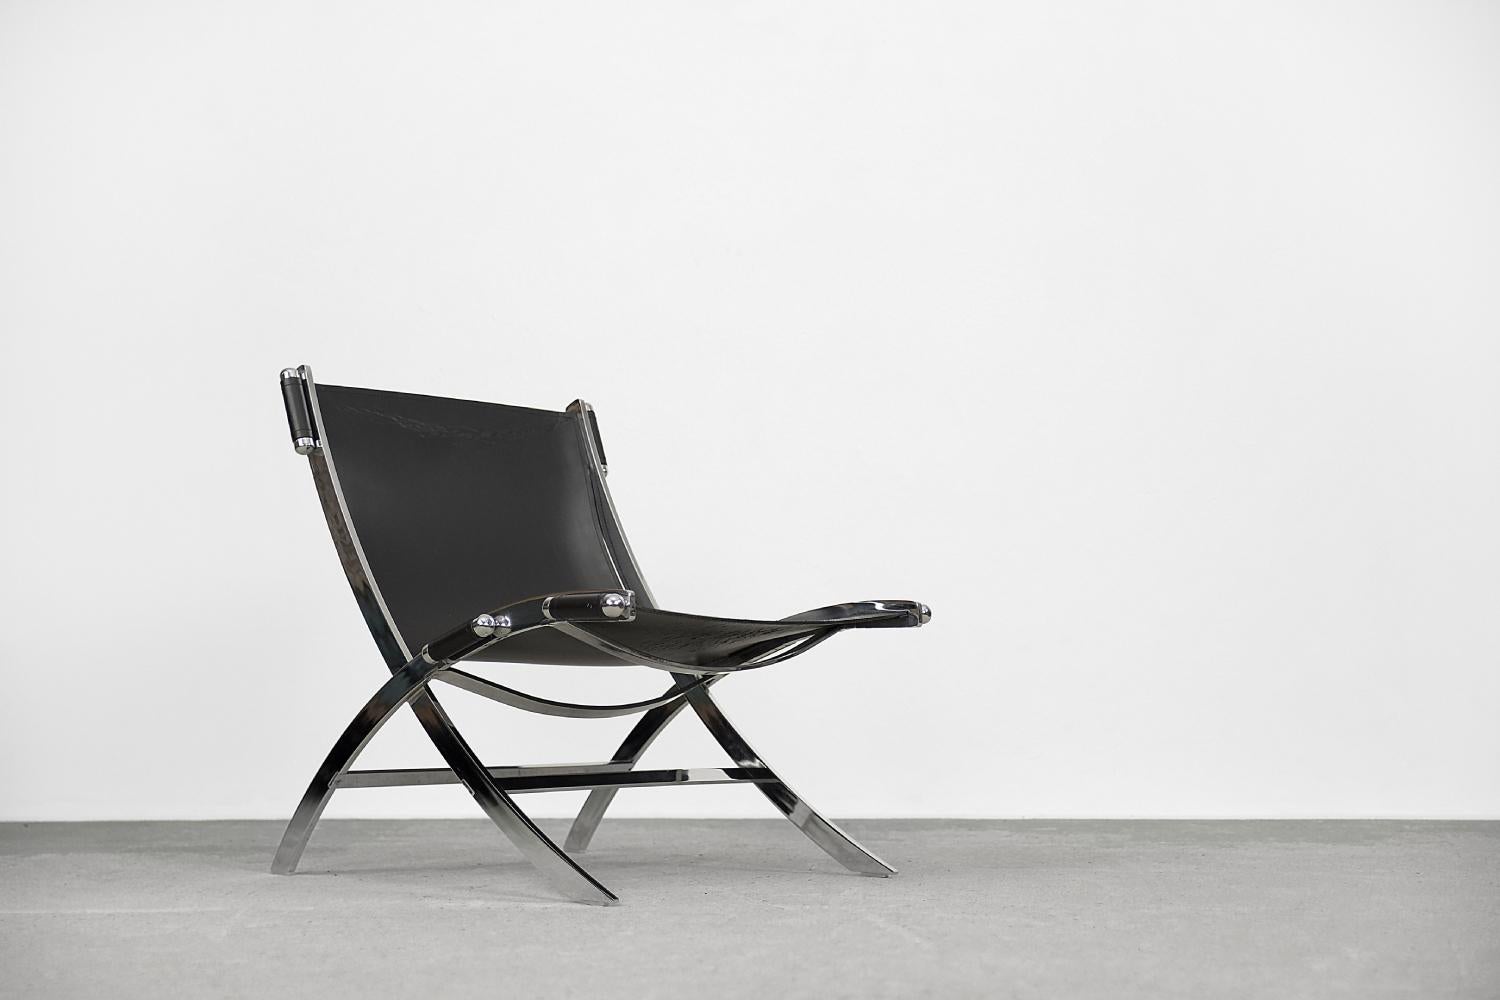 This heavy and solid but at the same time elegant Timeless chair was designed by Antonio Citterio for the Italian Flexform manufacture during the 1980s. This chair has a chromed steel X-shaped frame over which black natural leather has been